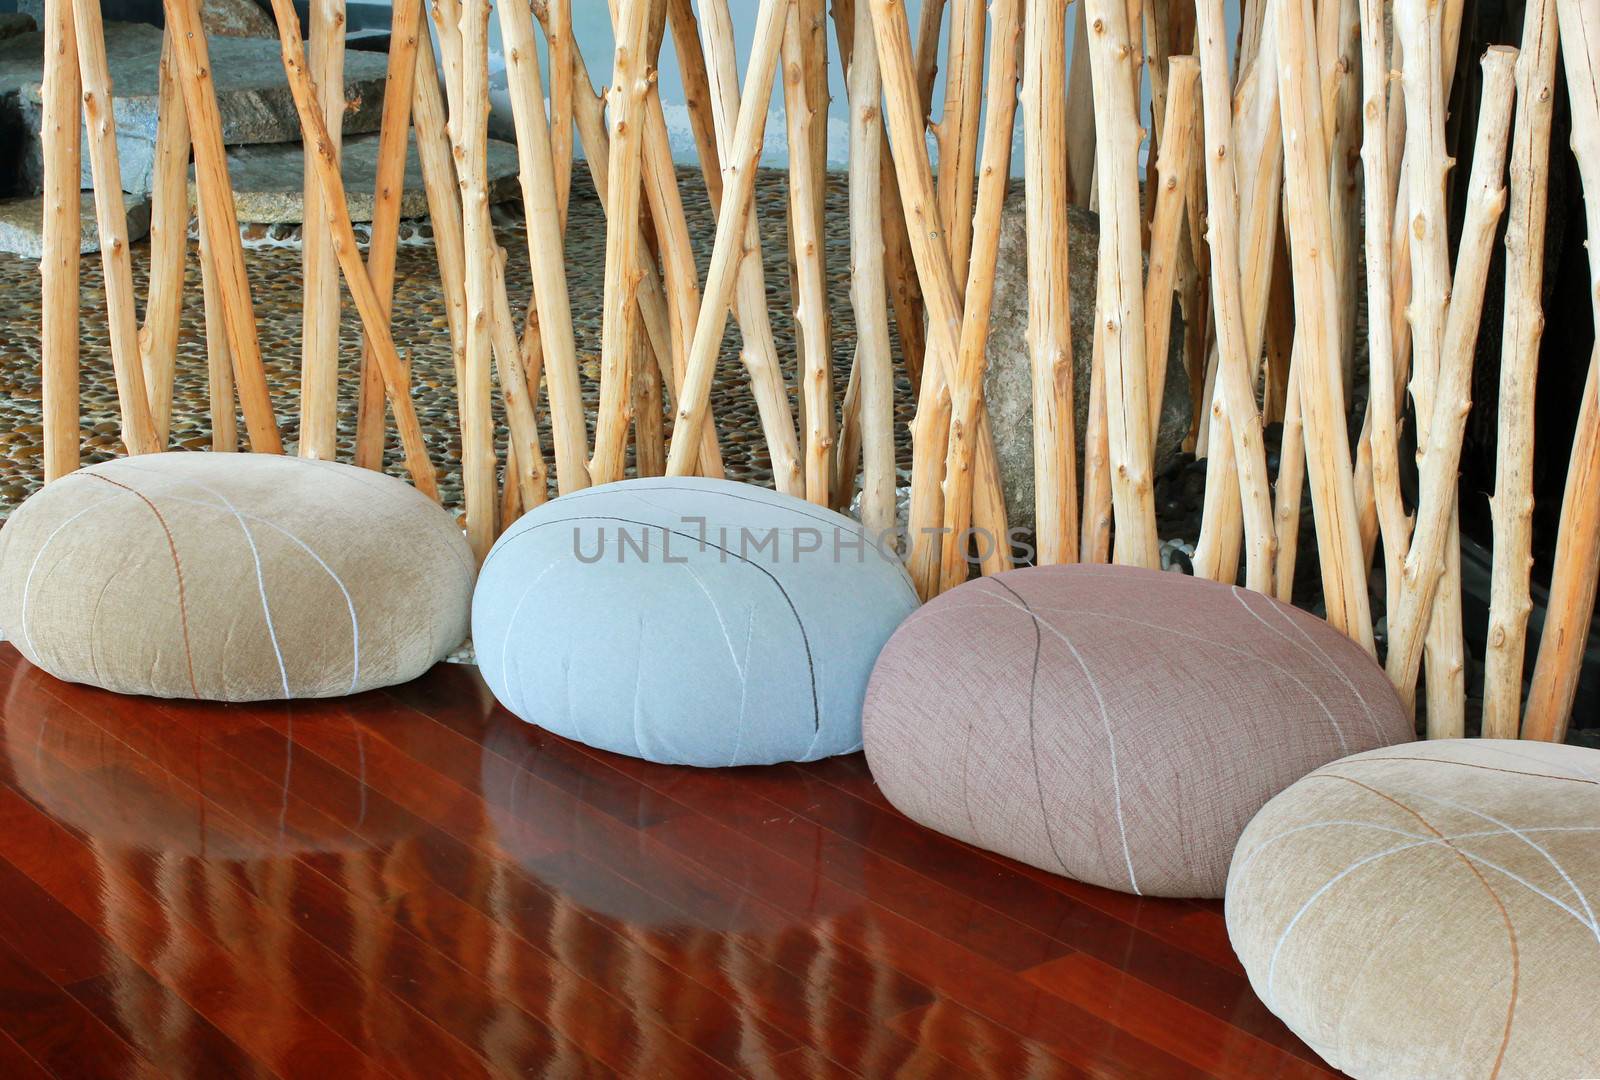 Cushion seat in quiet interior room for meditation by nuchylee